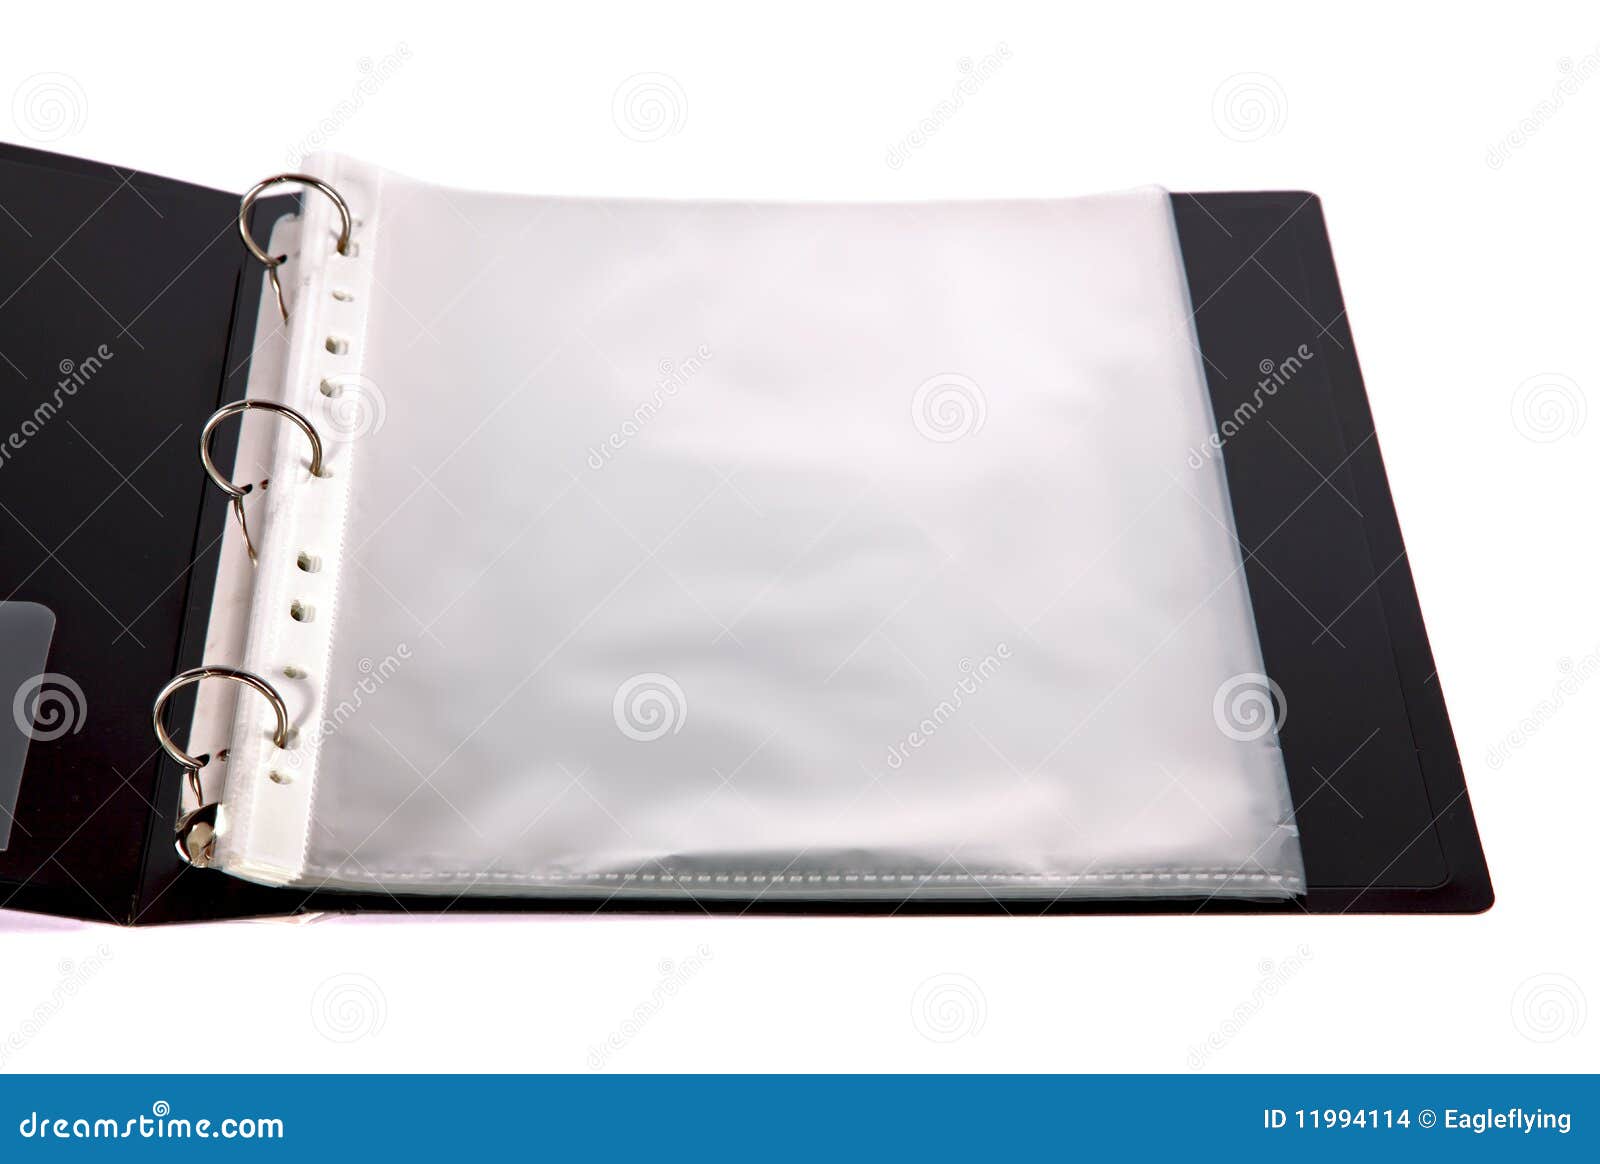 Opened Binder With Plastic Pockets Stock Photo Image of